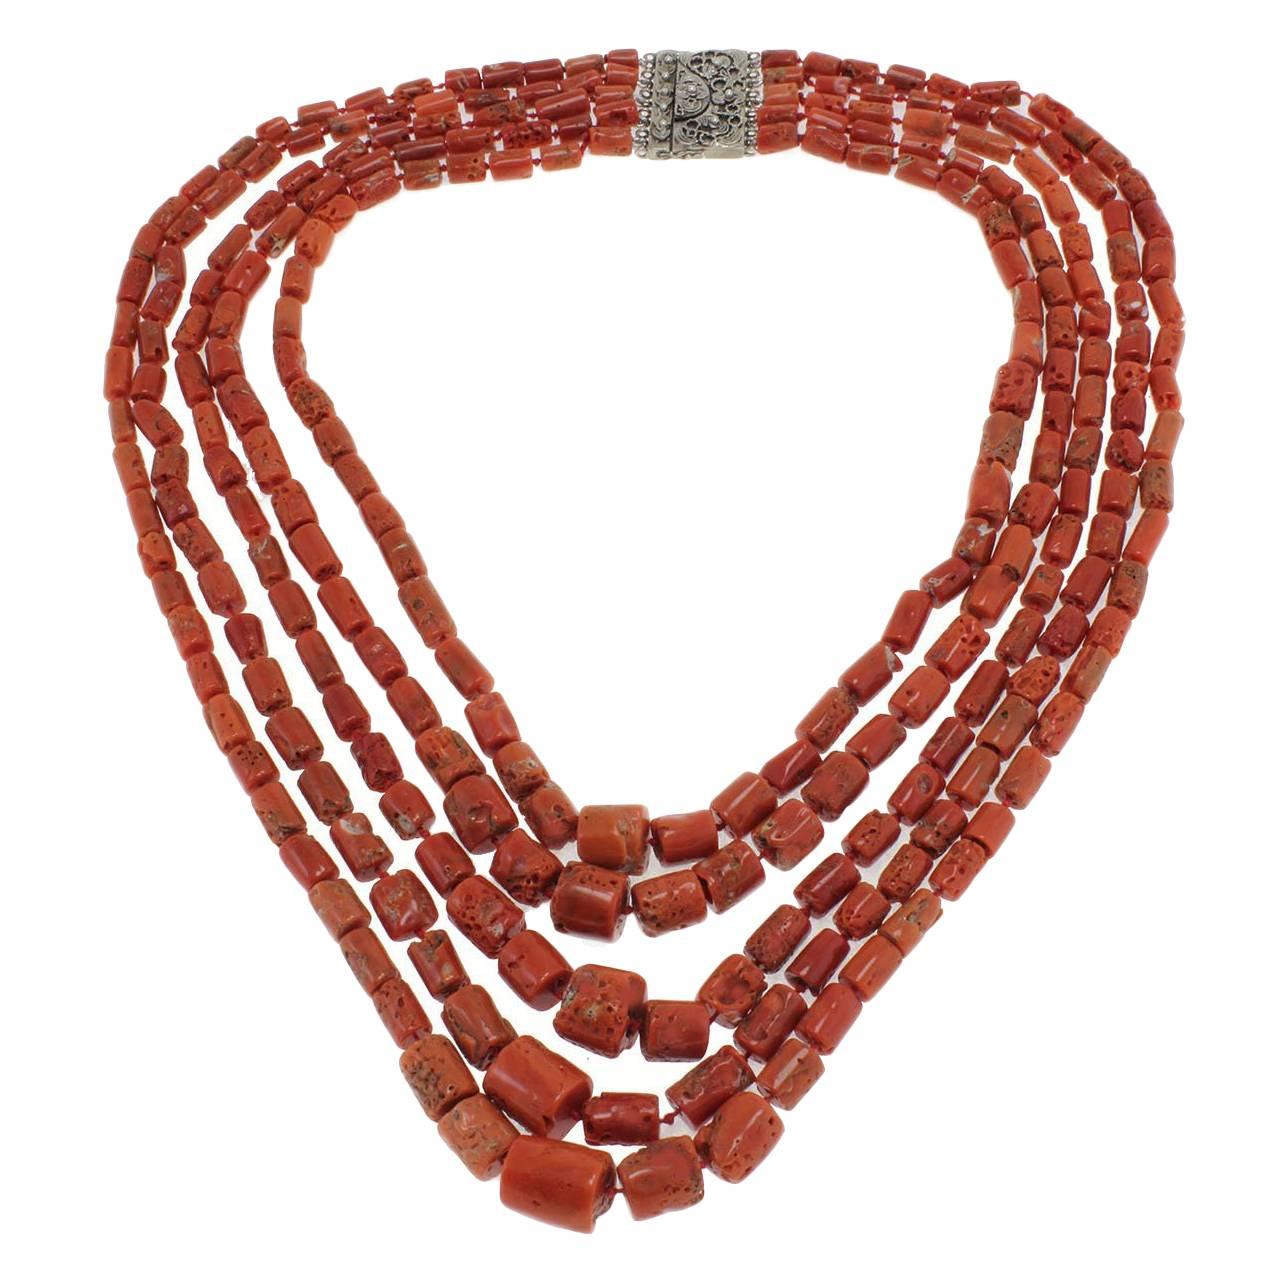 Antique Italian Coral Necklace with Silver Clasp